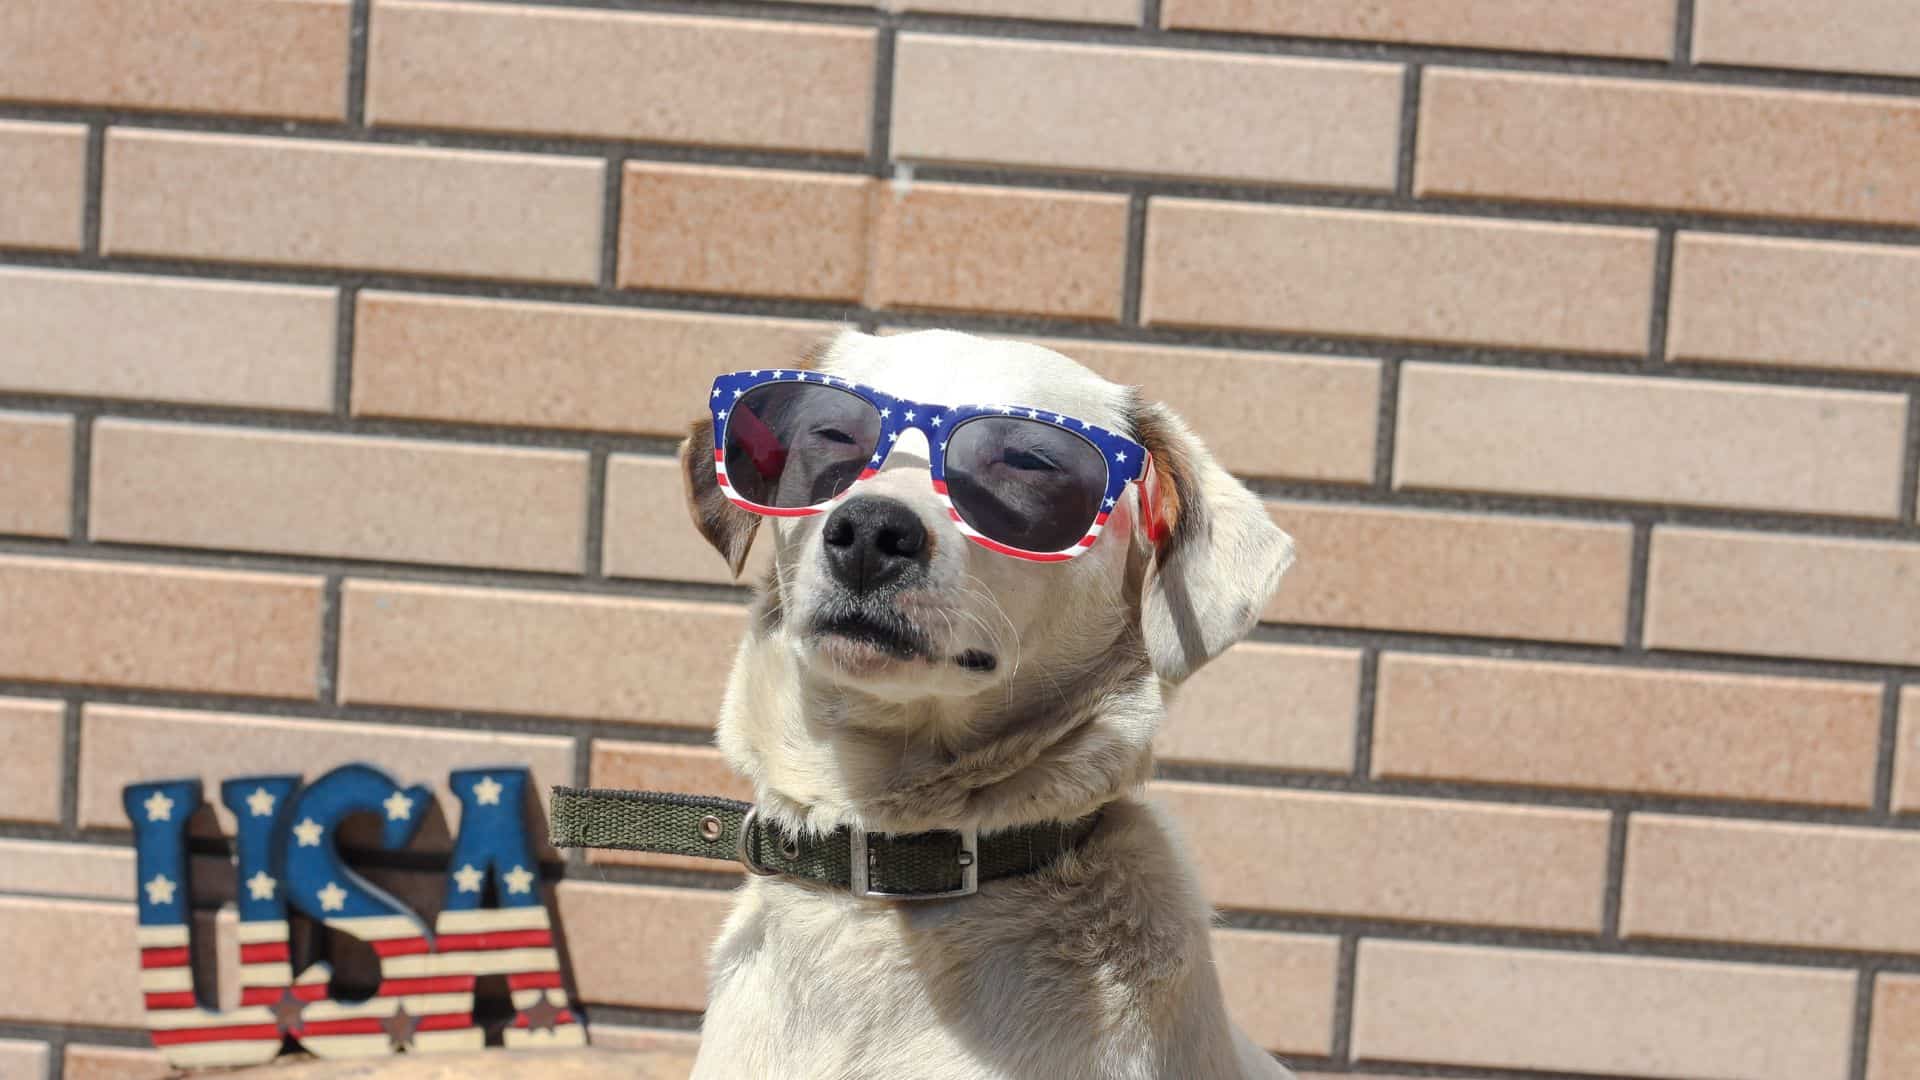 5 Tips On How To Make This 4th Of July Easier For Your Dog